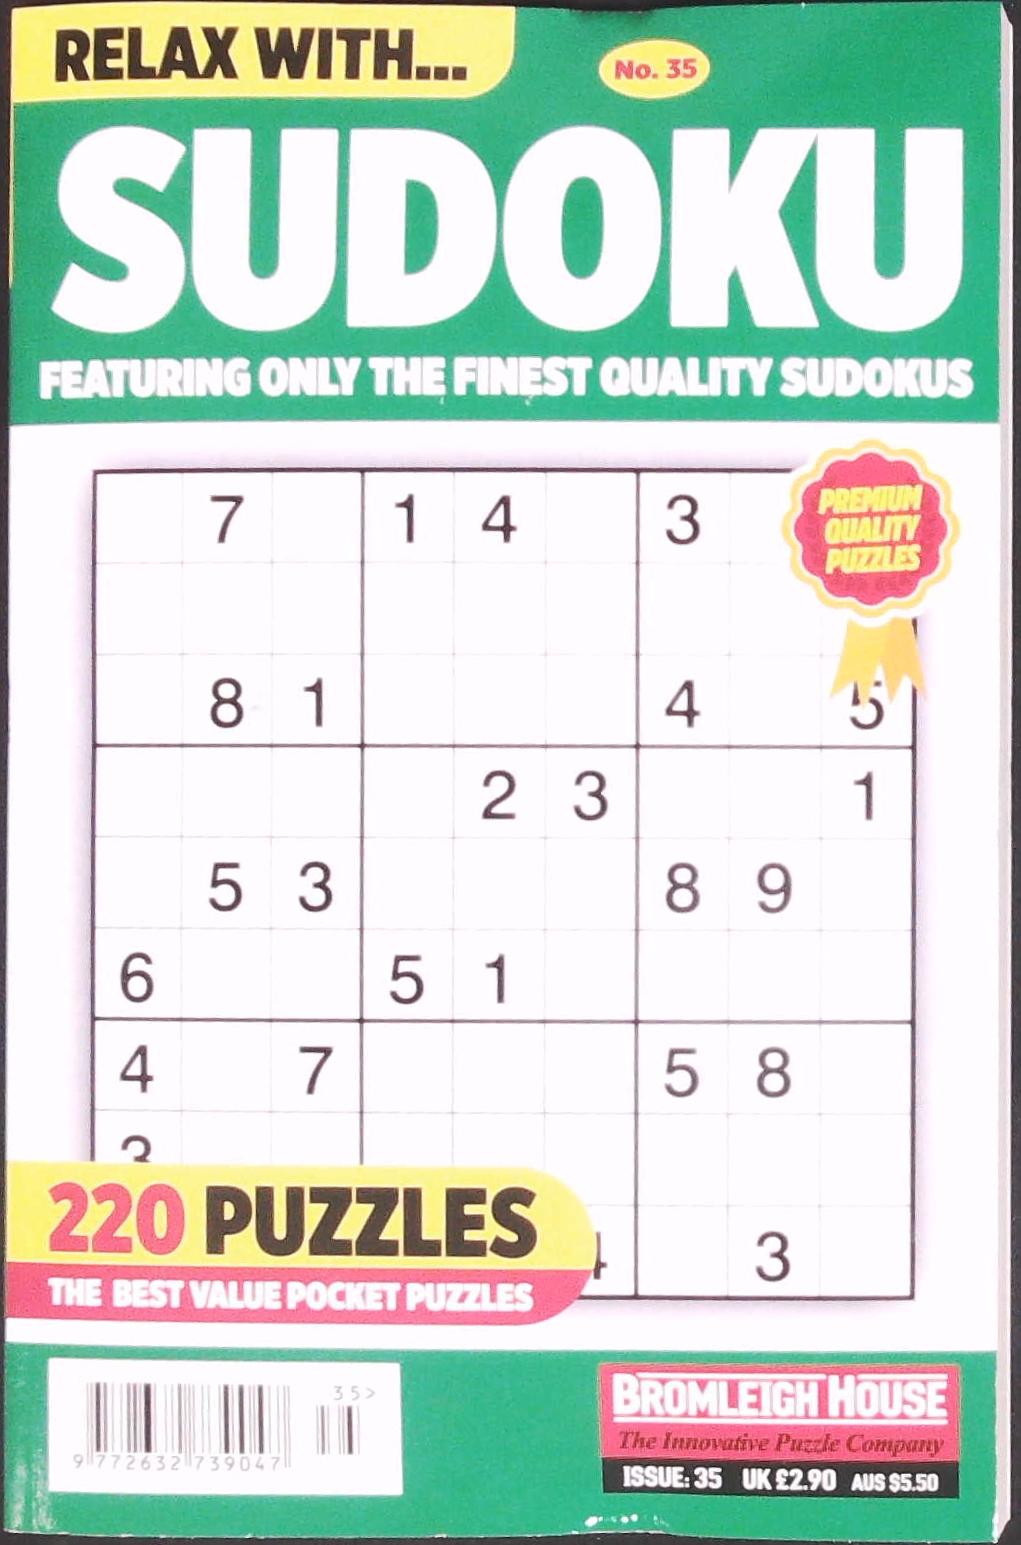 RELAX WITH SUDOKU